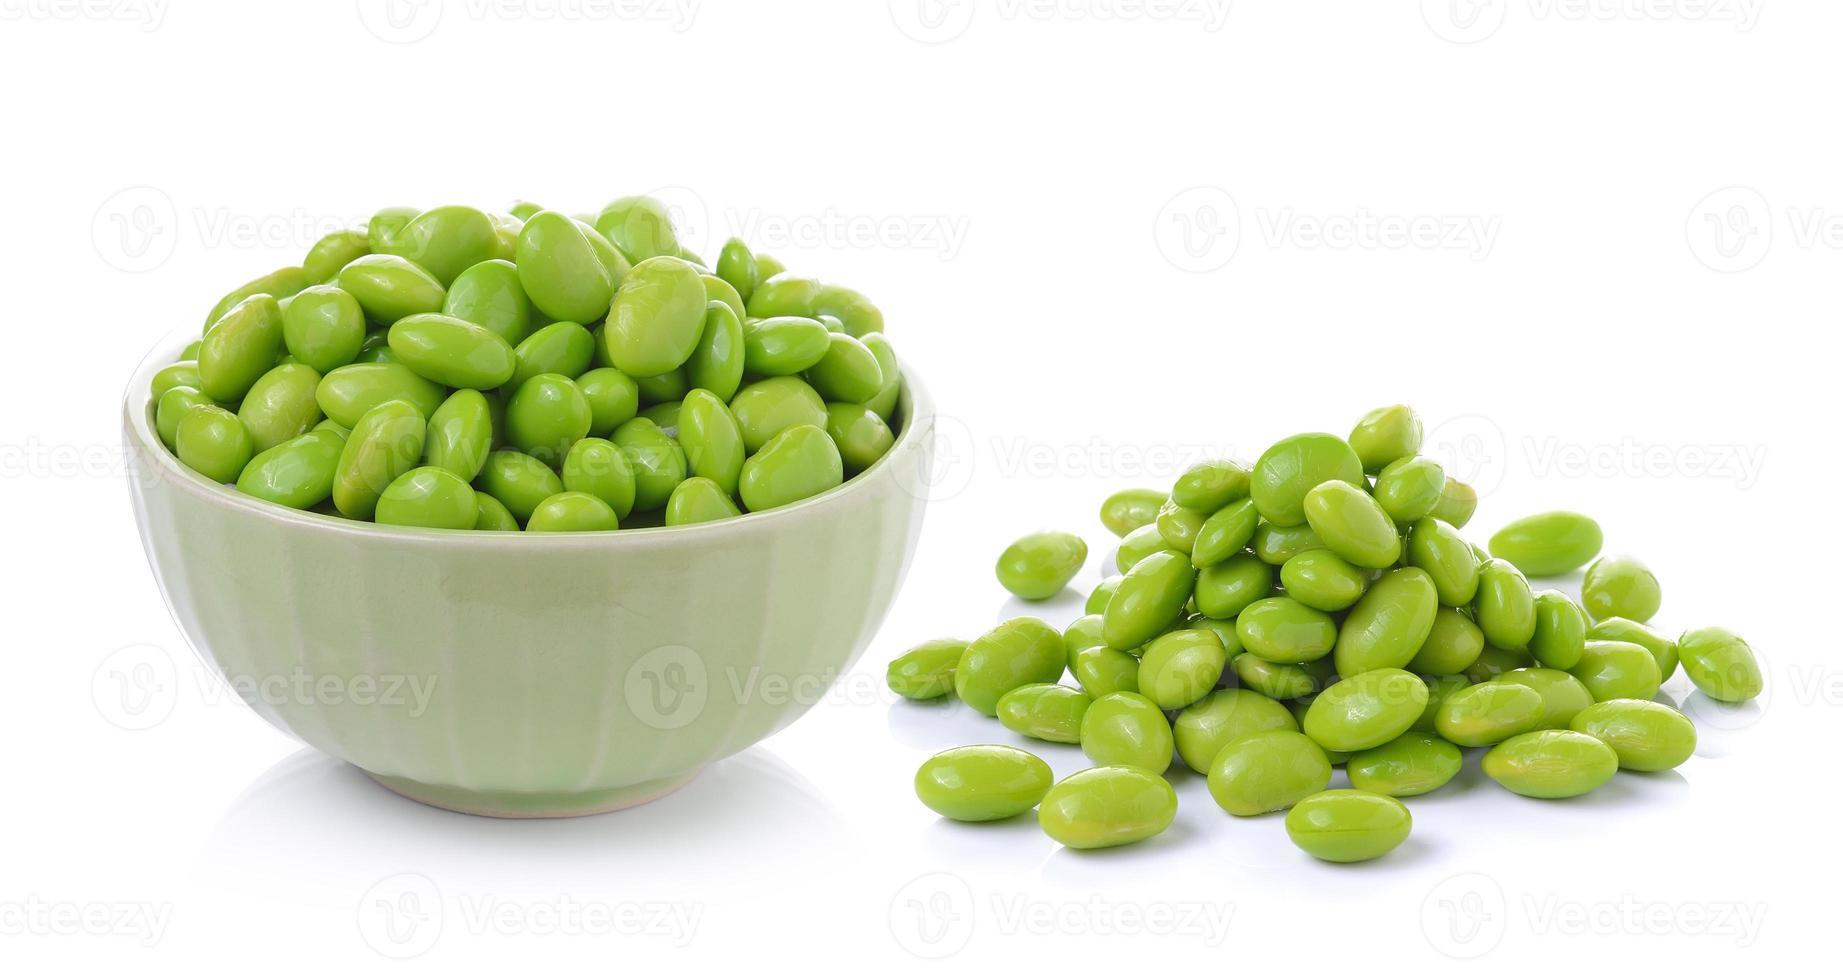 green soybeans on white background photo